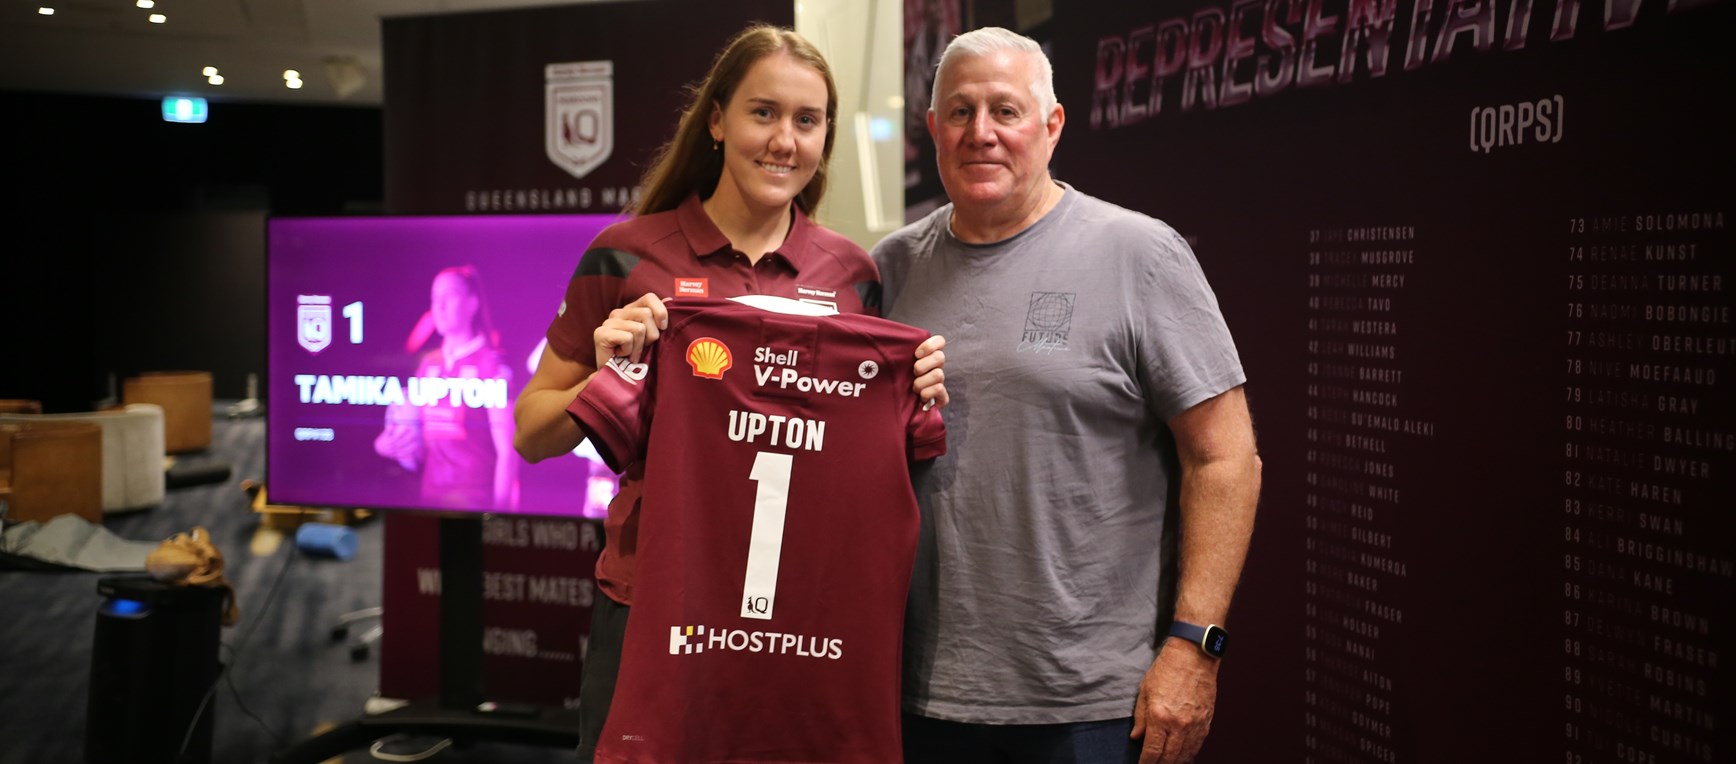 In pictures: Maroons Game I jersey presentation